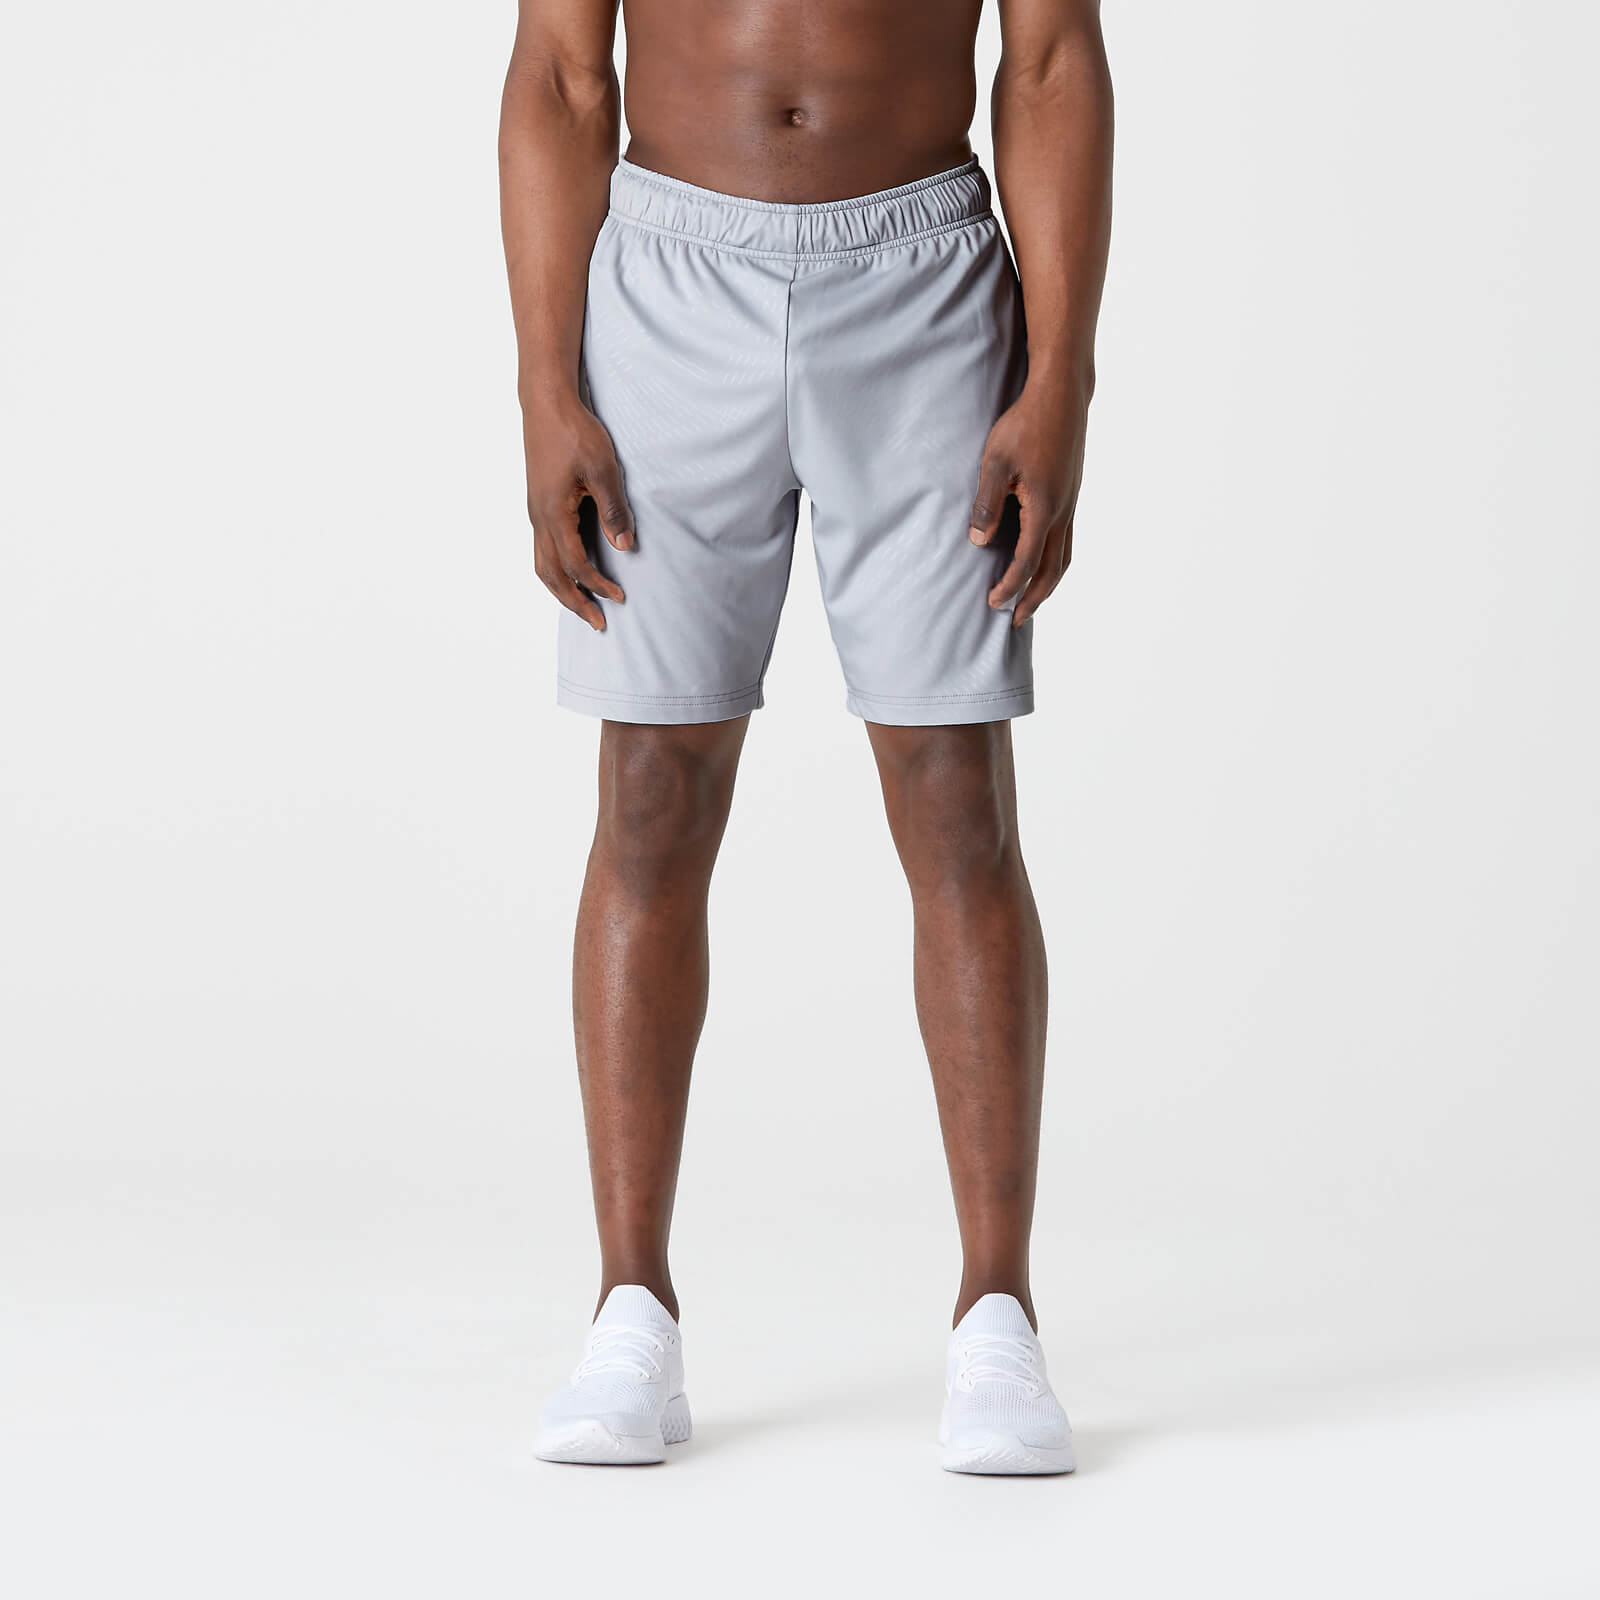 Myprotein Dry-Tech Infinity Shorts - Silver